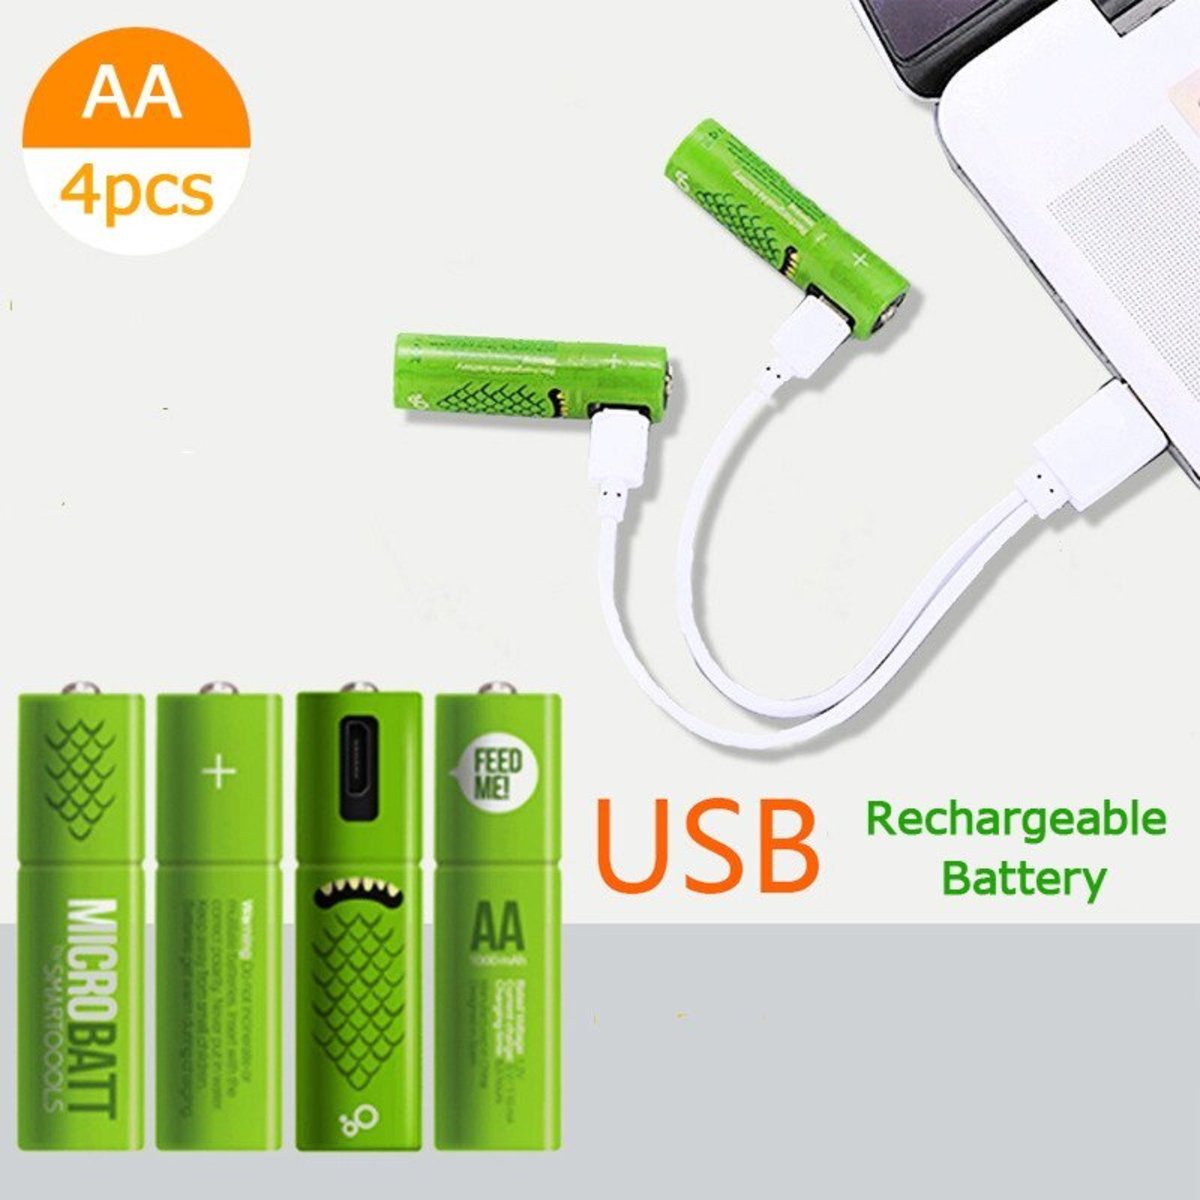 rechargeable battery set